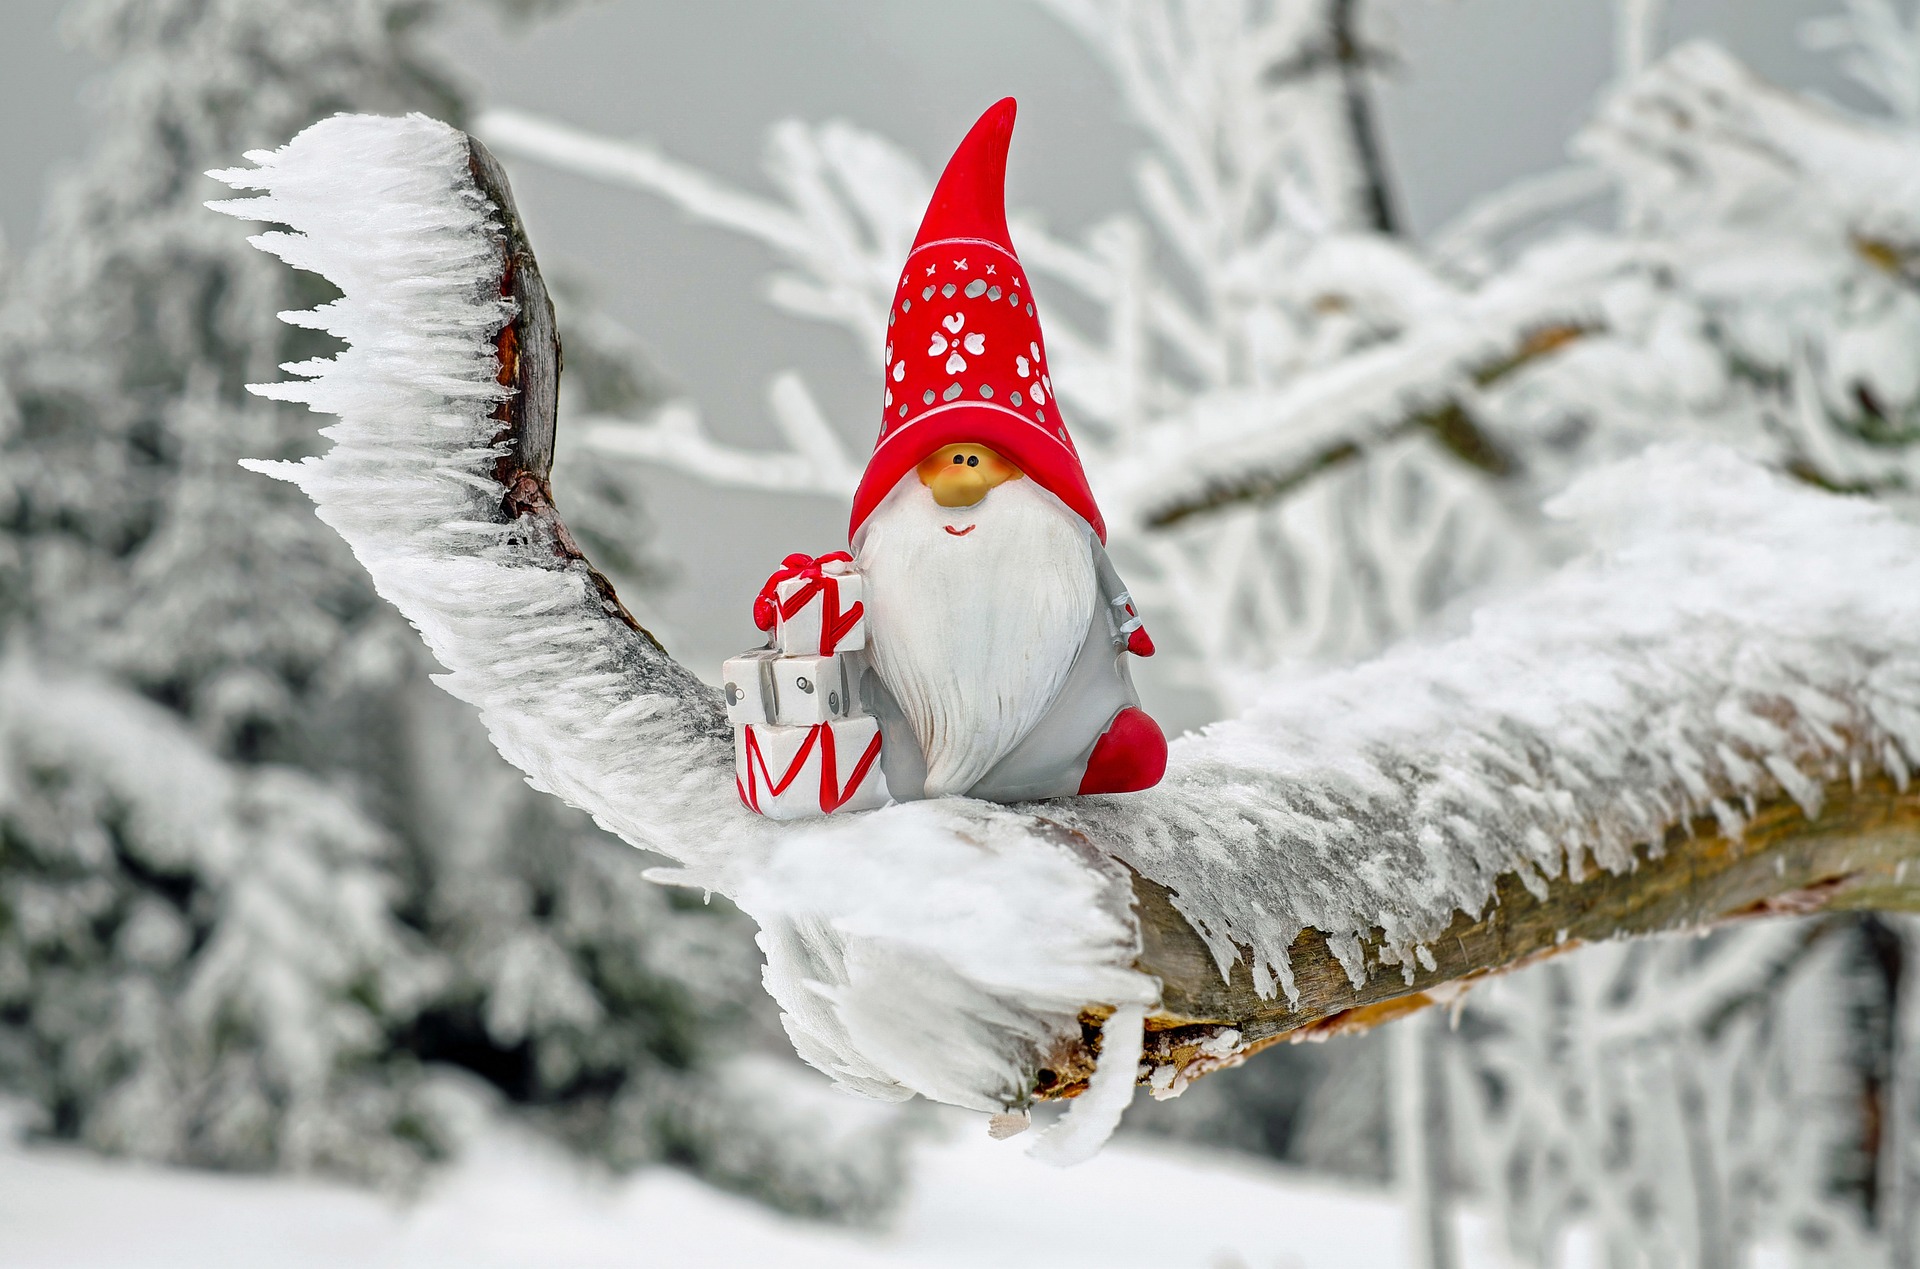 A gnome in a snowy setting